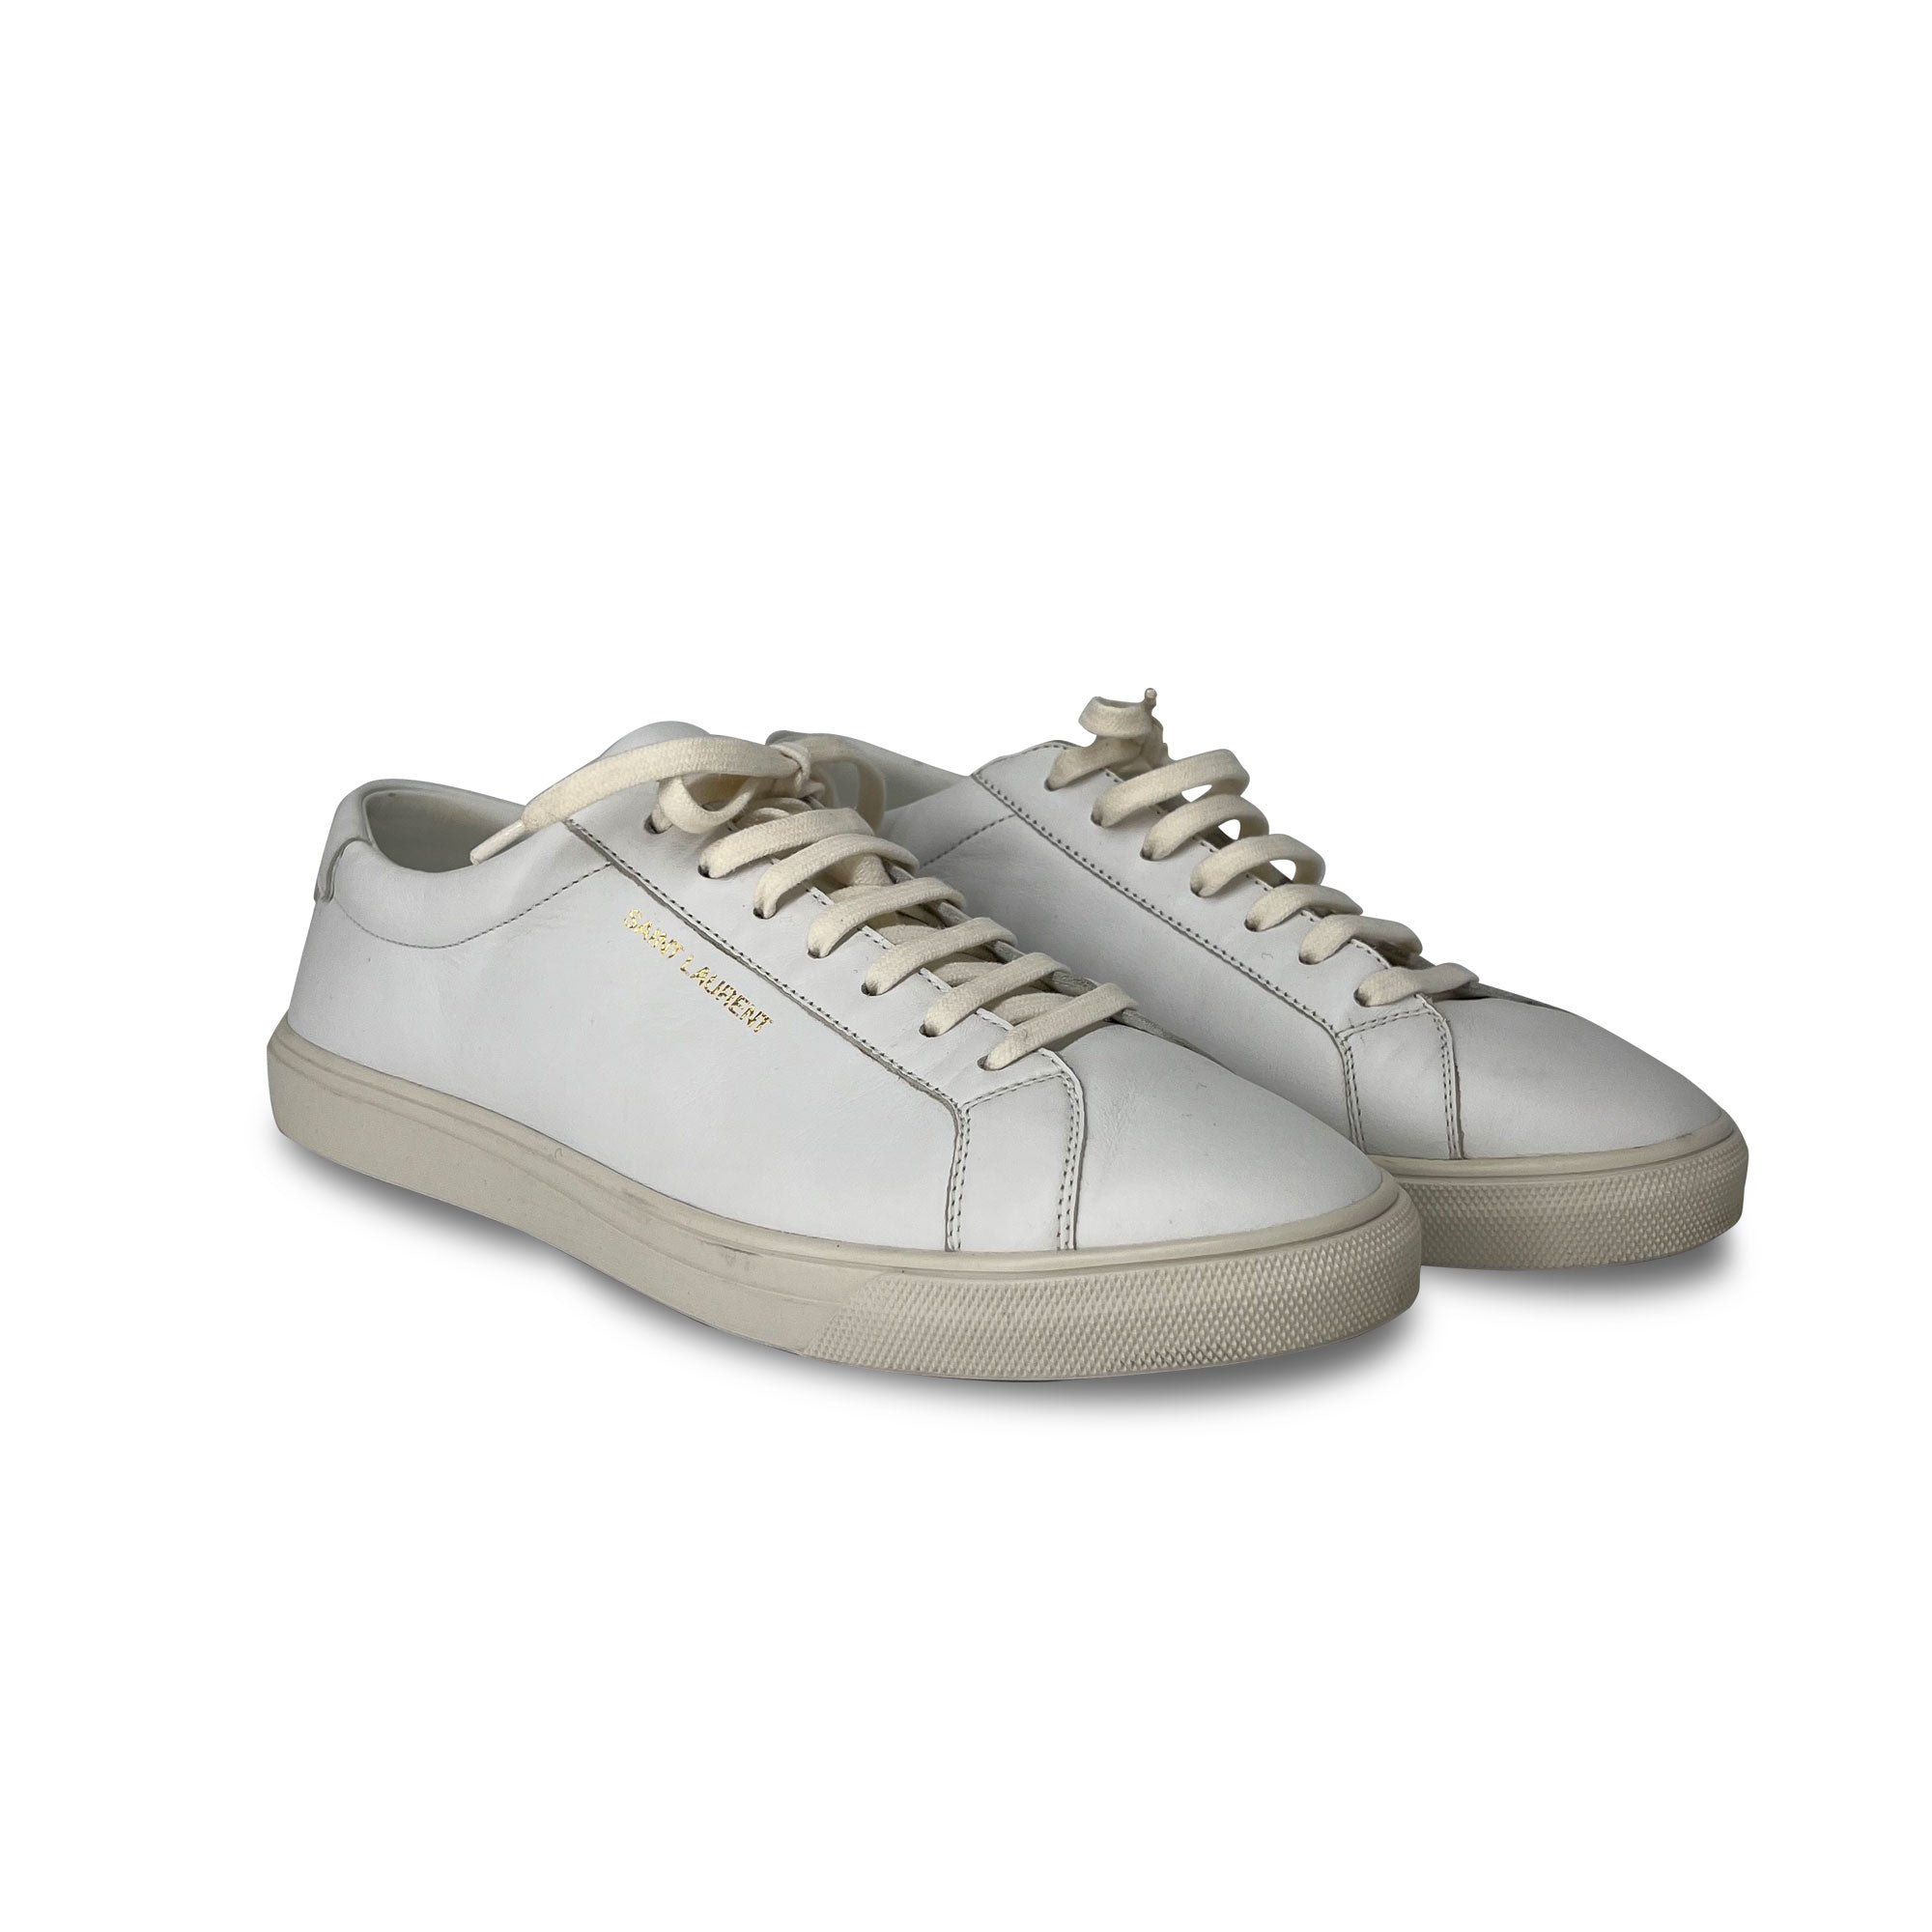 Yves Saint Laurent Andy leather sneakers